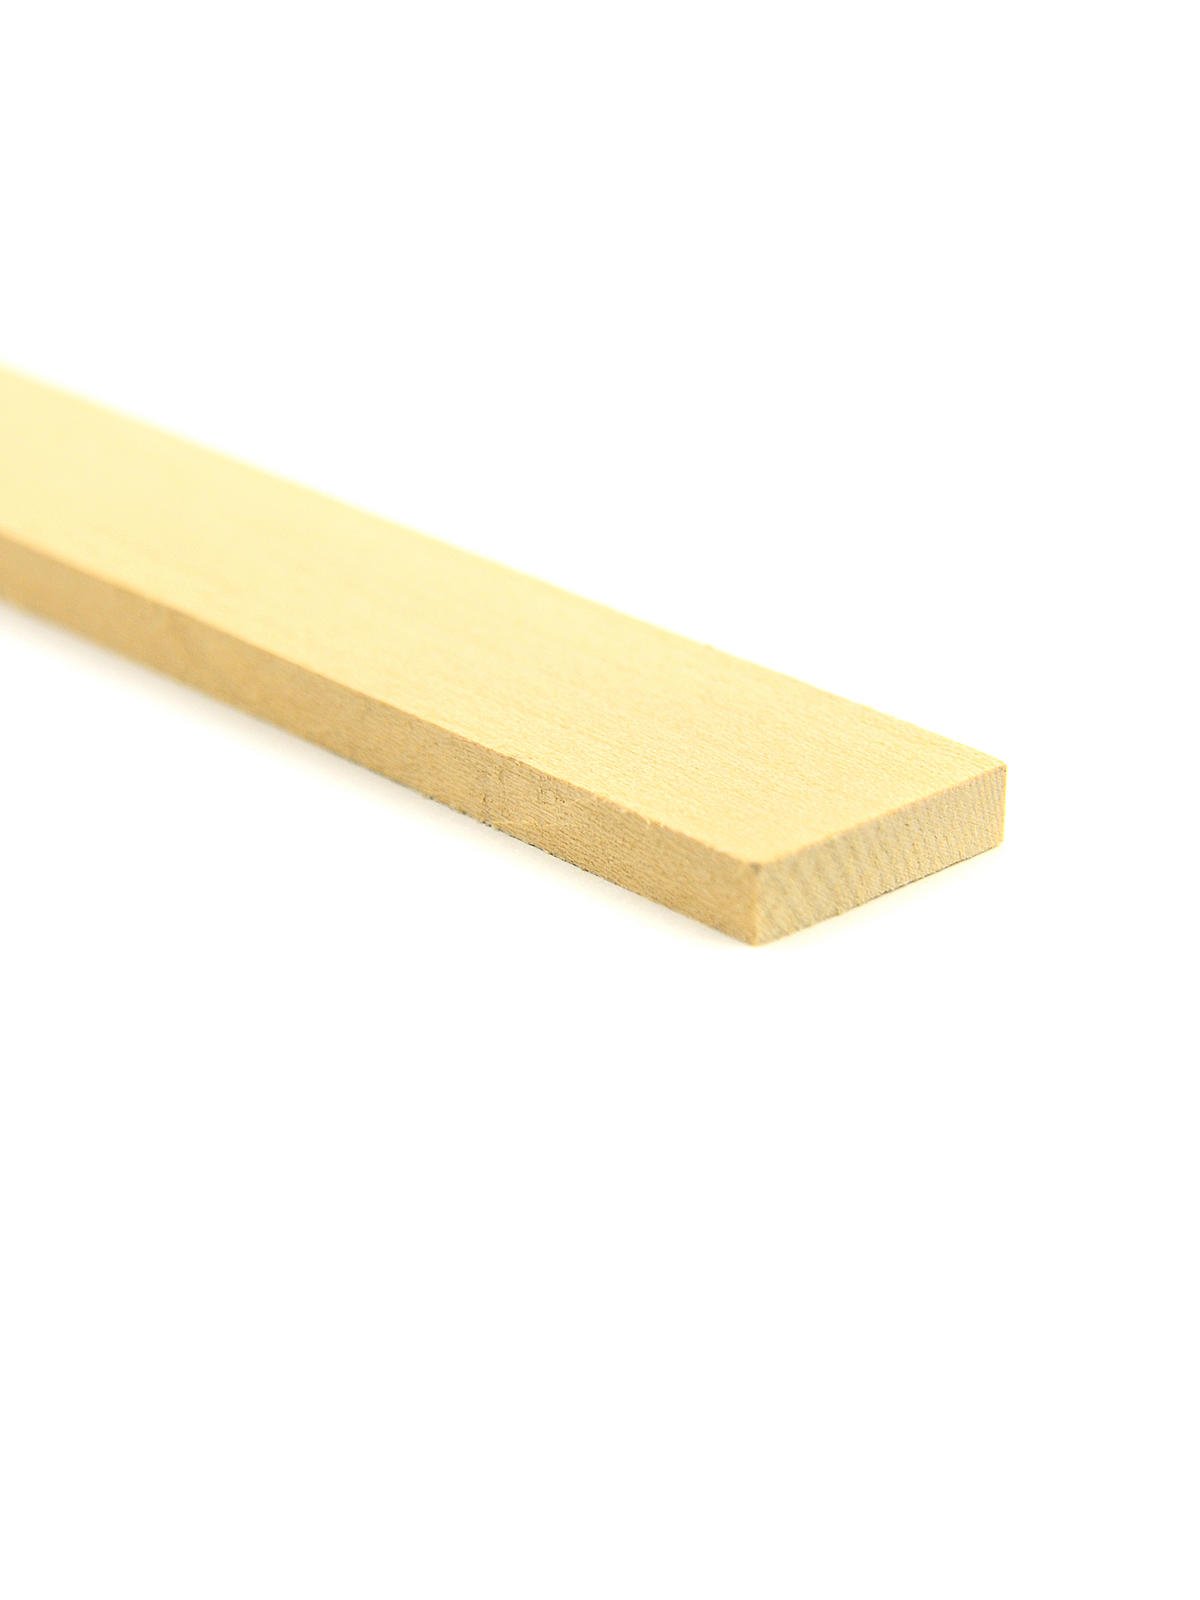 MIDWEST PRODUCTS 6402 36 x 4 x 1/16-Inch Basswood Sheet at Sutherlands